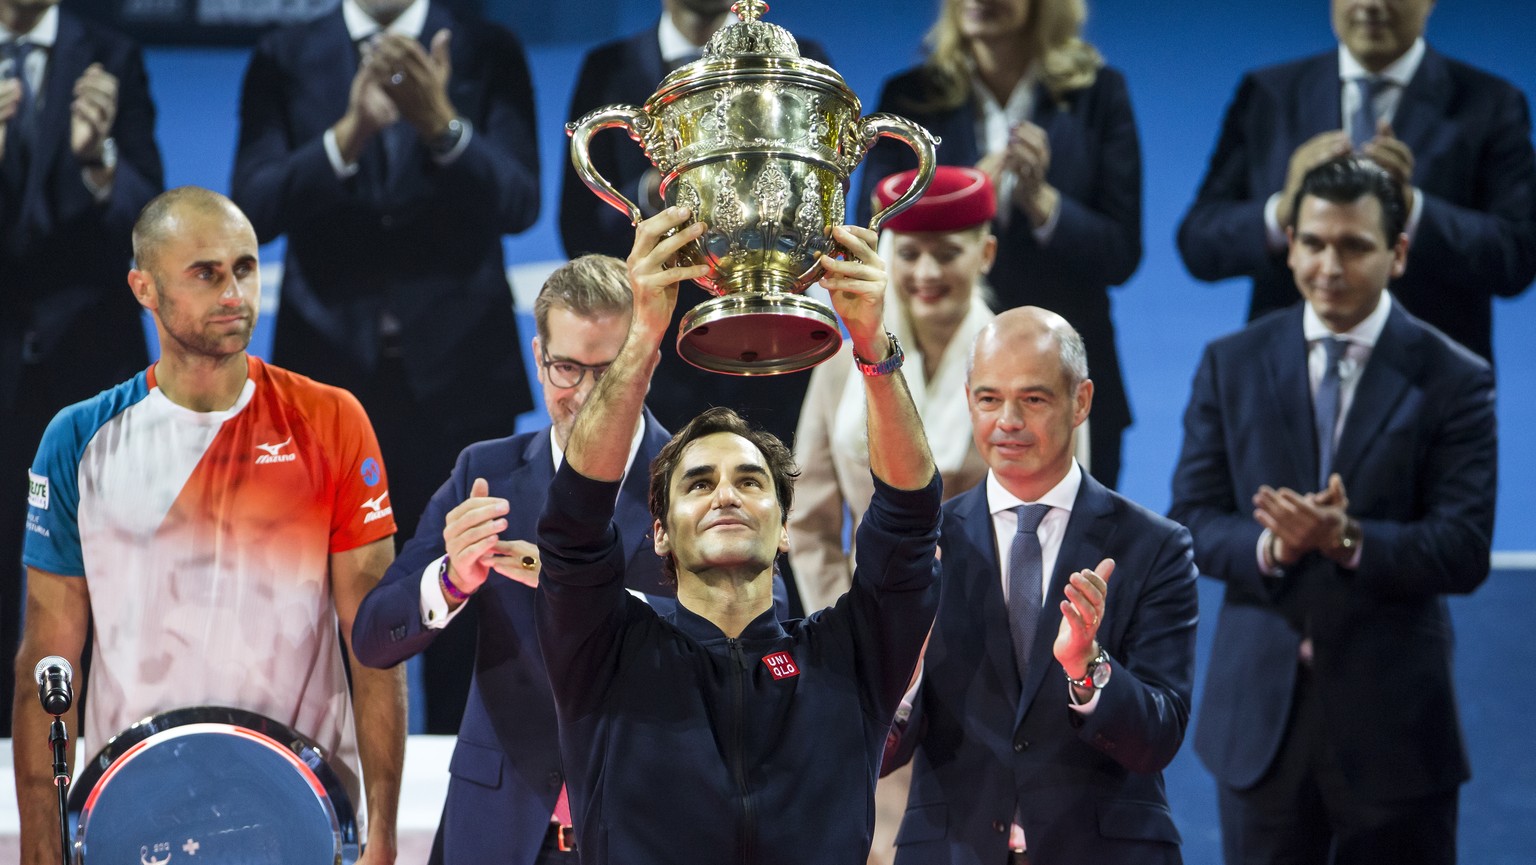 Switzerland&#039;s Roger Federer poses with his trophy after defeating Romania&#039;s Marius Copil in their final match at the Swiss Indoors tennis tournament at the St. Jakobshalle in Basel, Switzerl ...